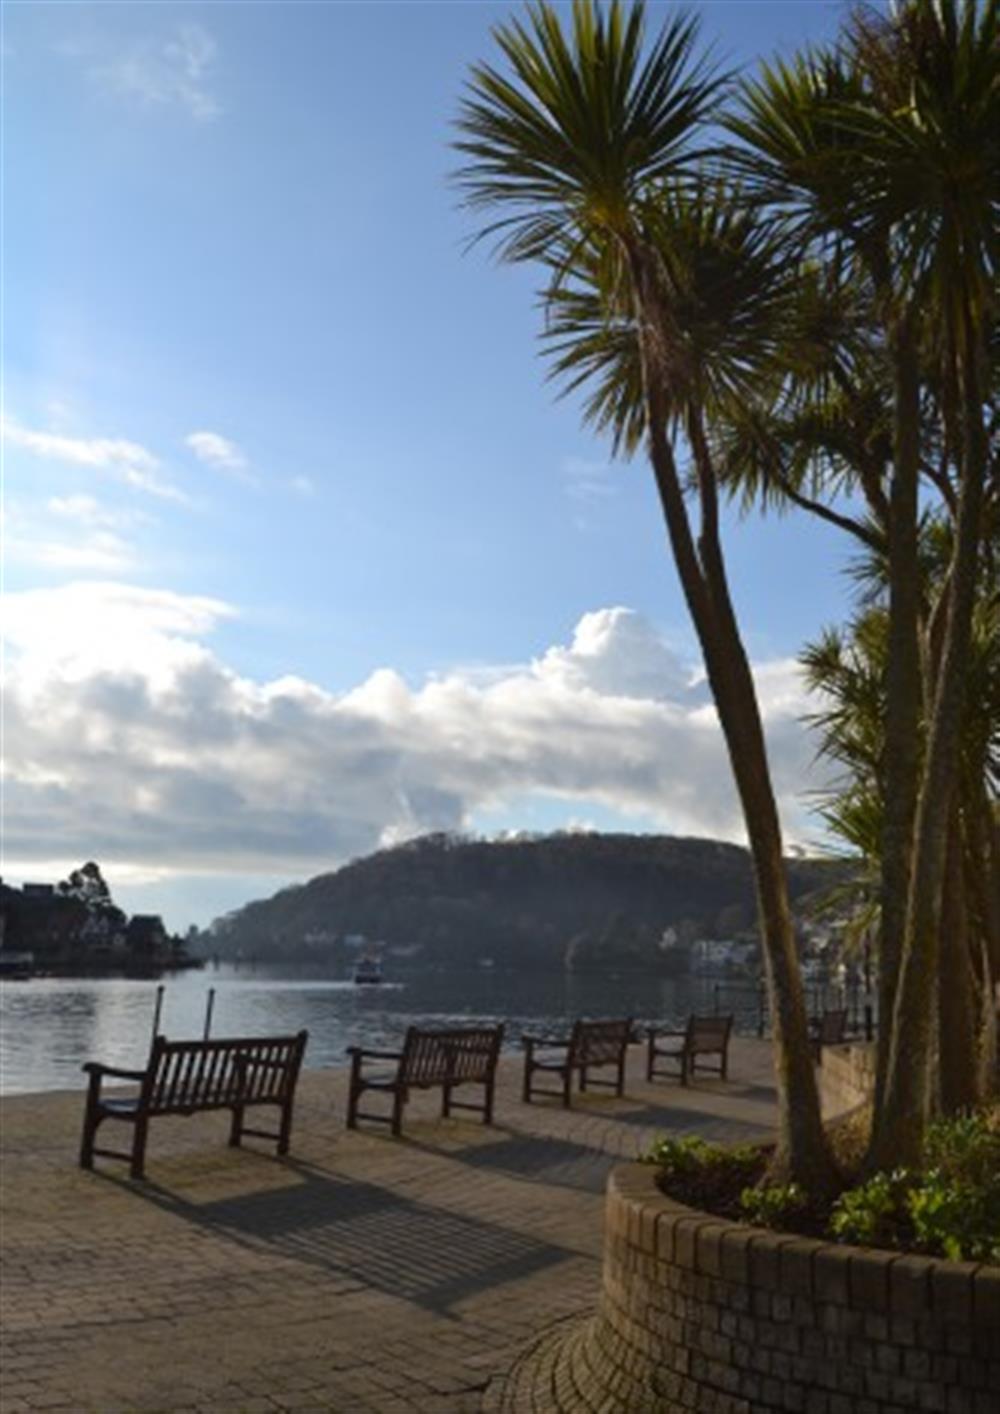 Riverside seating on the embankment. at Wisteria House in Dartmouth